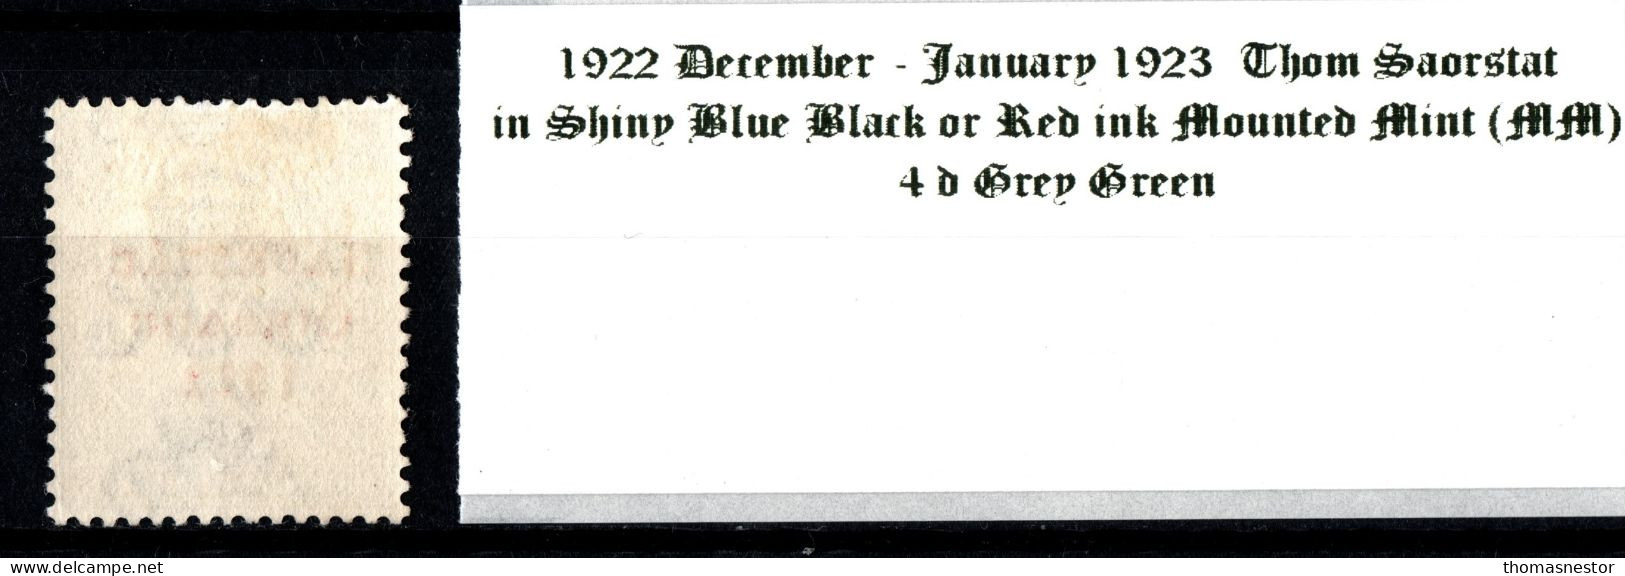 1922 - 1923 Dec-Jan Thom Saorstát In Shiny Blue Black Or Red Ink 4 D Grey Green (Red Overprint) Mounted Mint (MM) - Nuovi